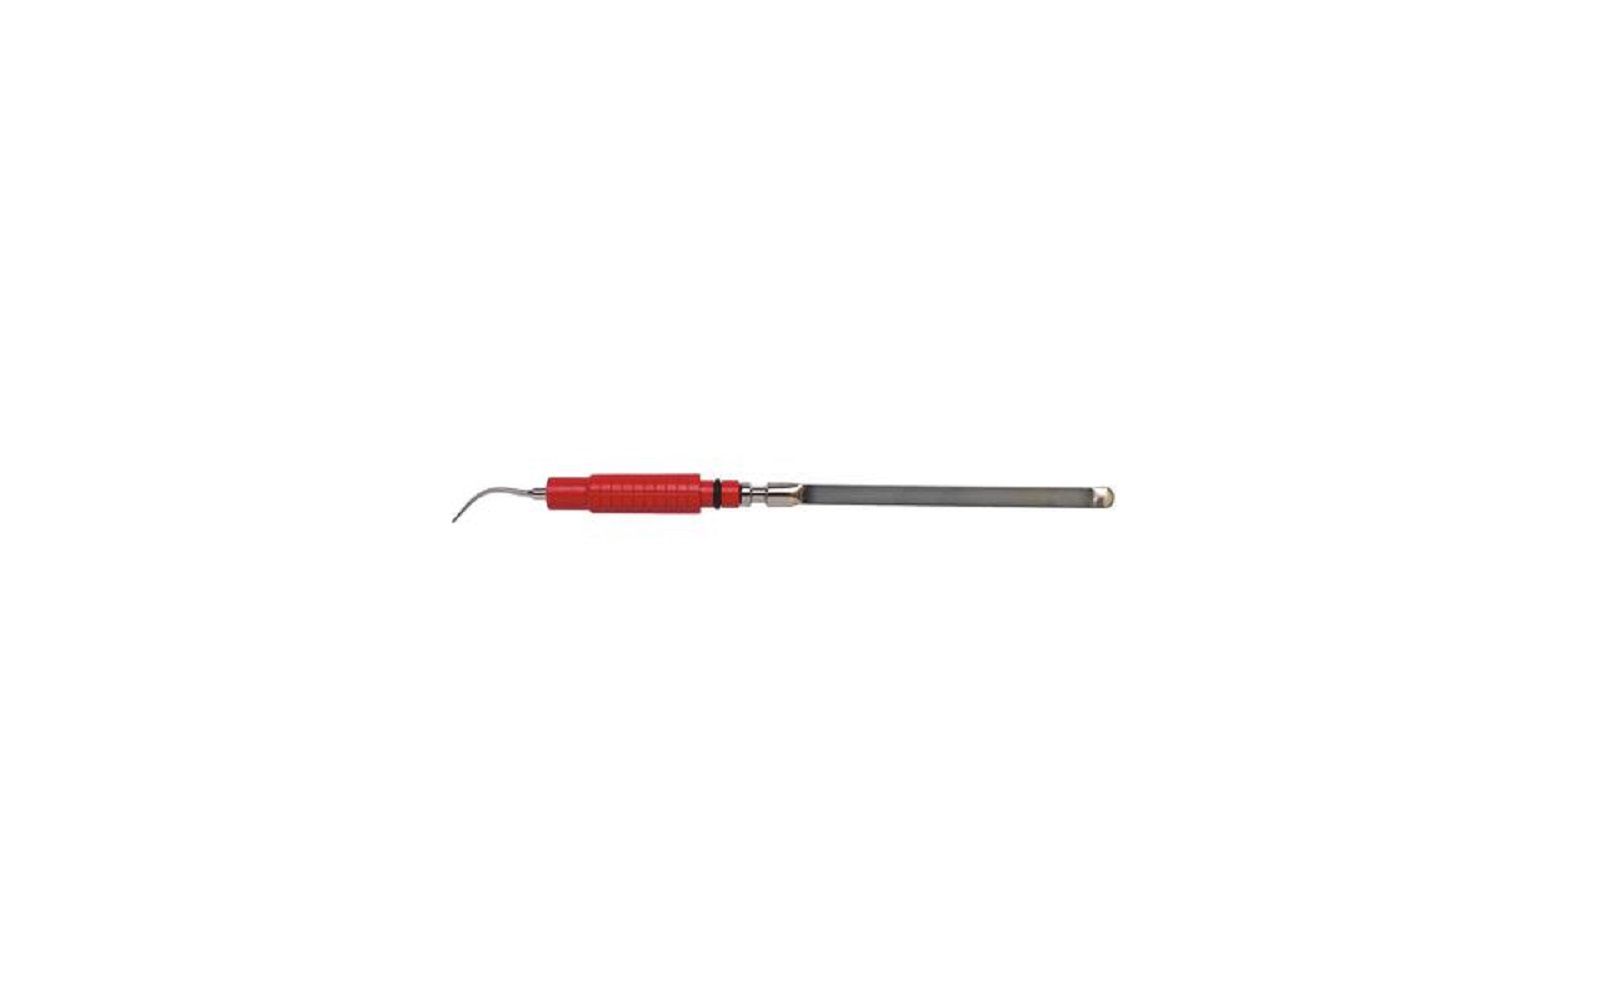 Resin handle ultrasonic scaler inserts - thin-tip 100, 30 khz, red